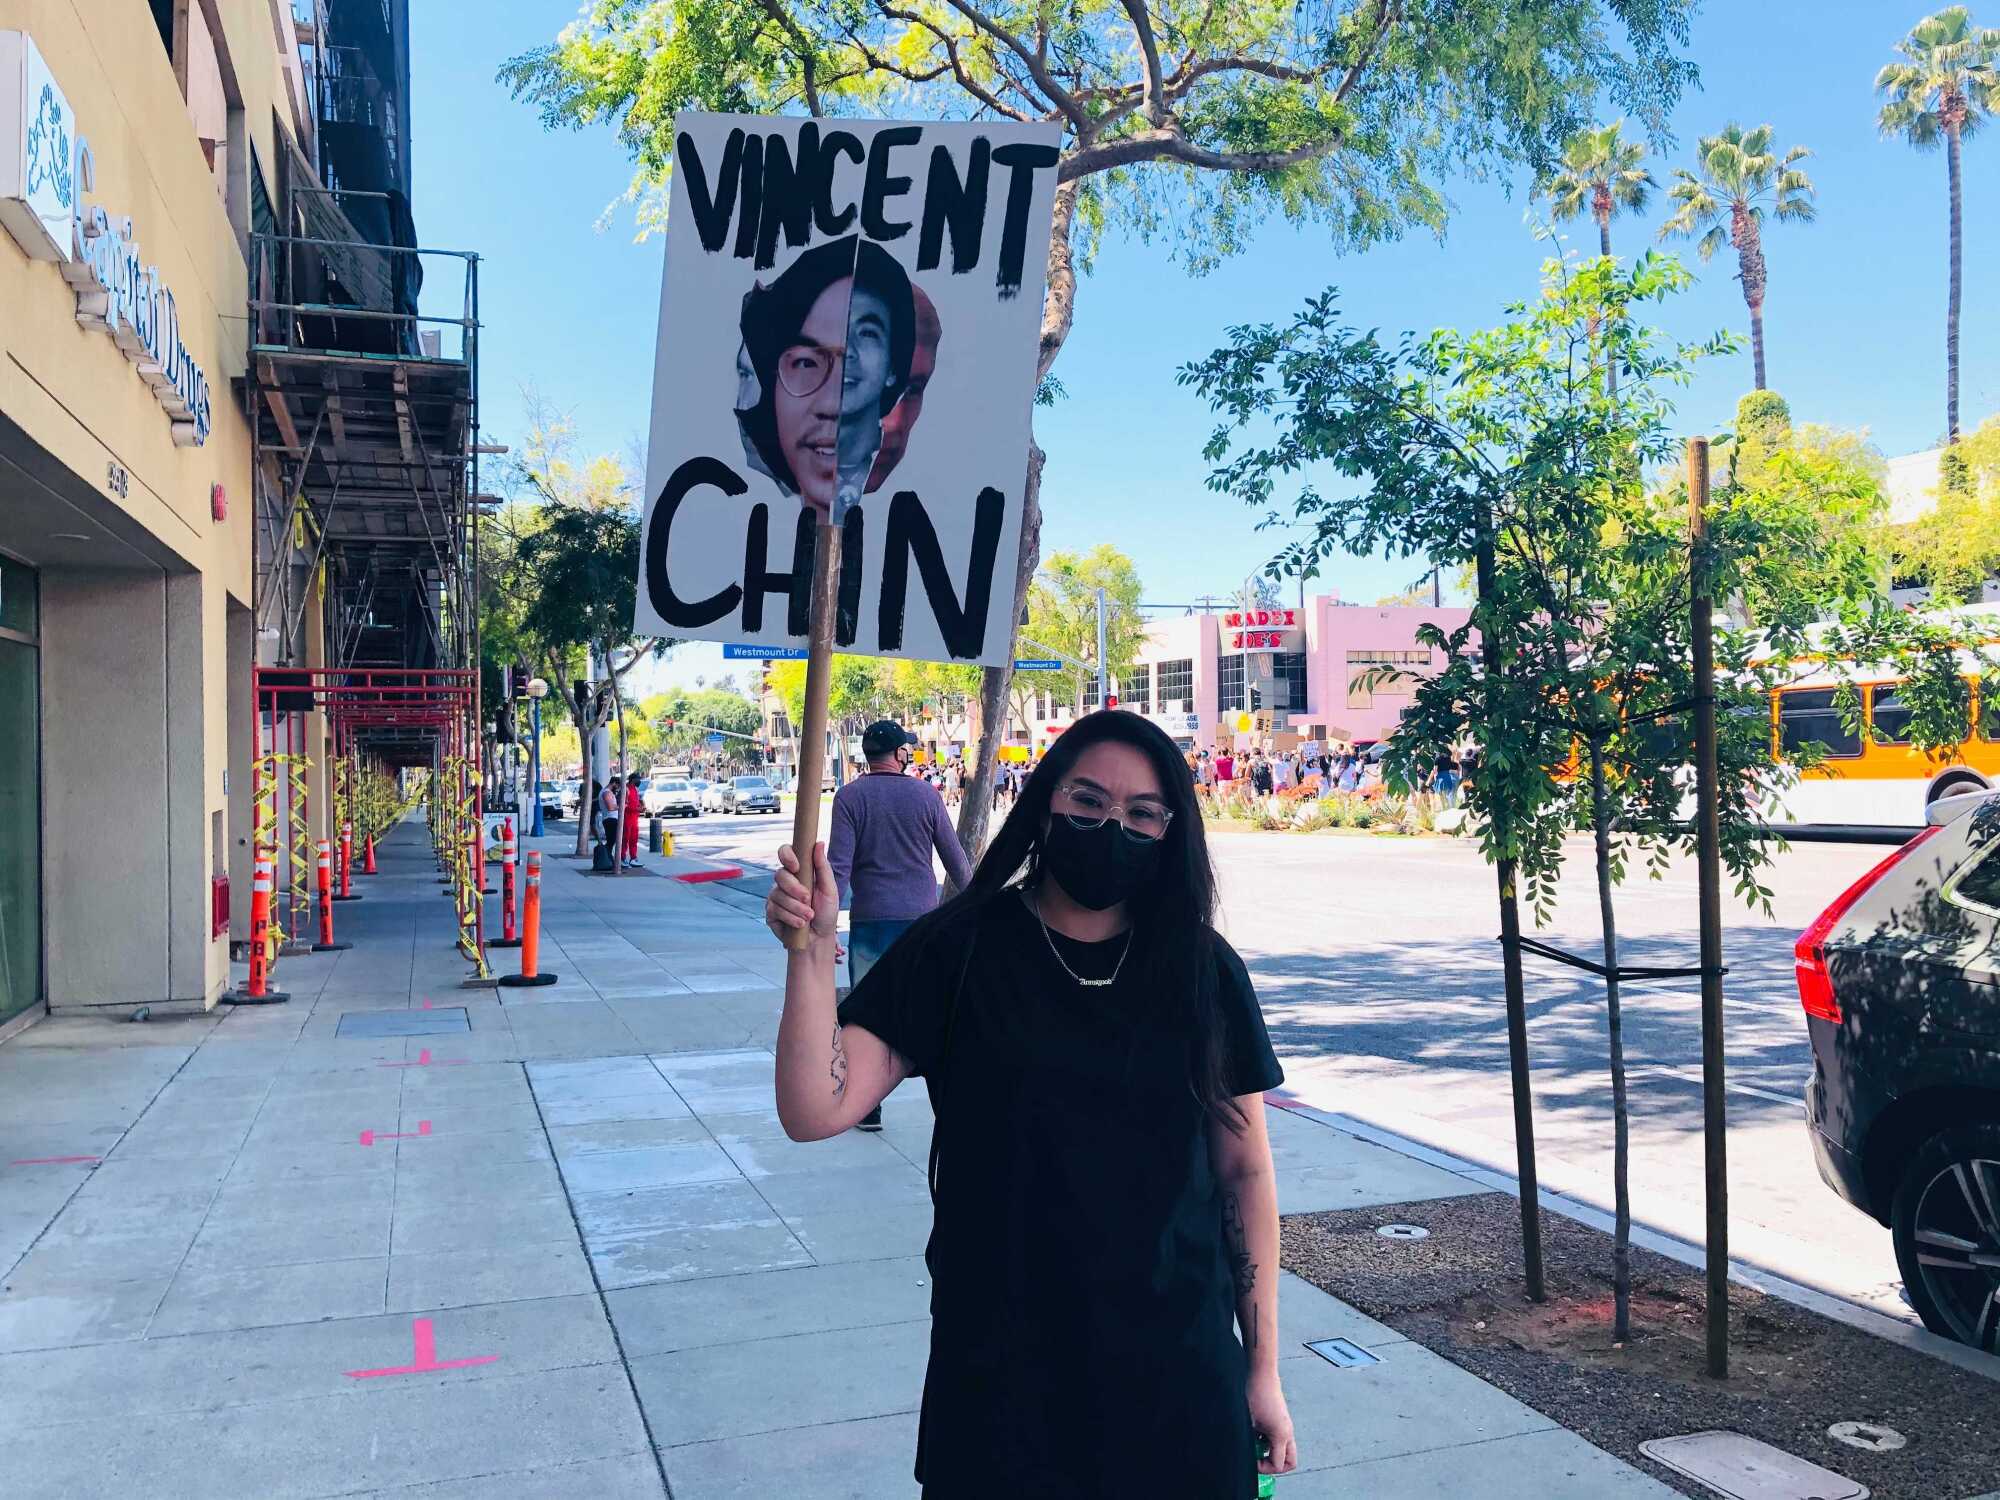 Artist Ann Le stands on a sidewalk holding a sign with a collage she created of Vincent Chin.